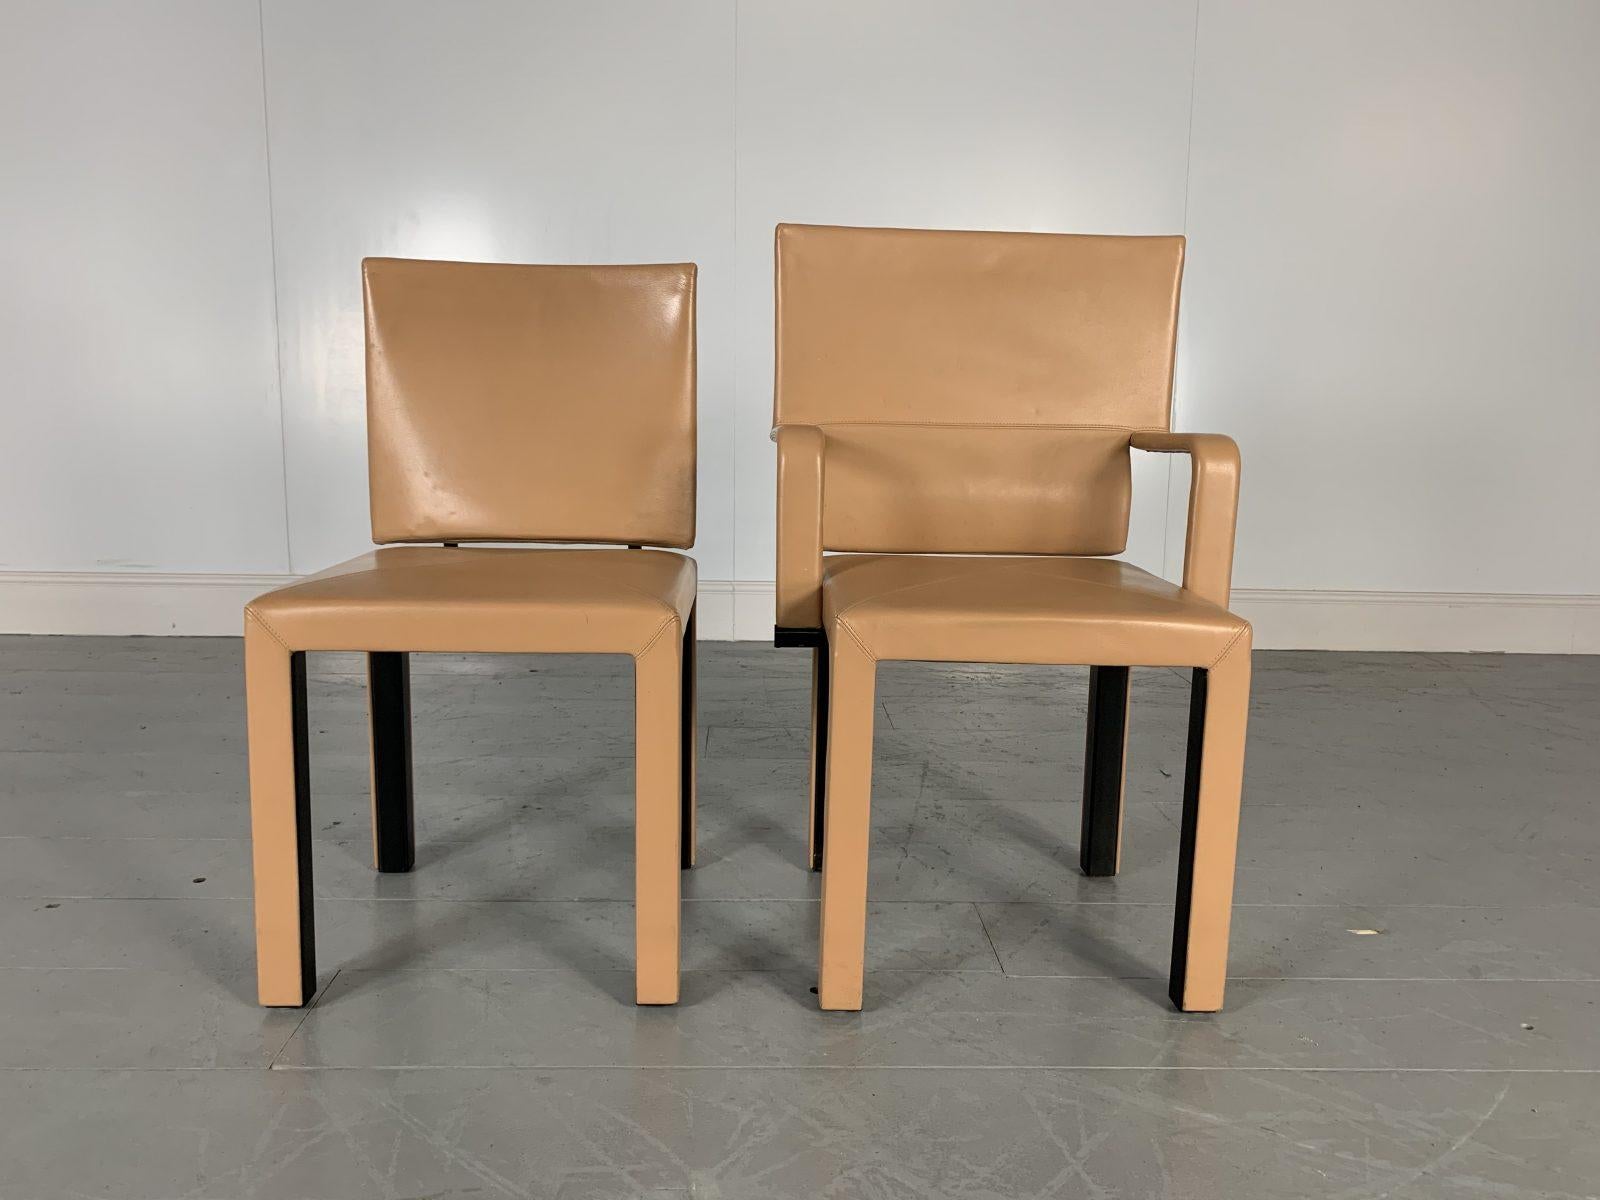 Superb Suite of 8 B&B Italia “Arcadia” Dining Chairs in Tan “Gamma” Leather For Sale 1